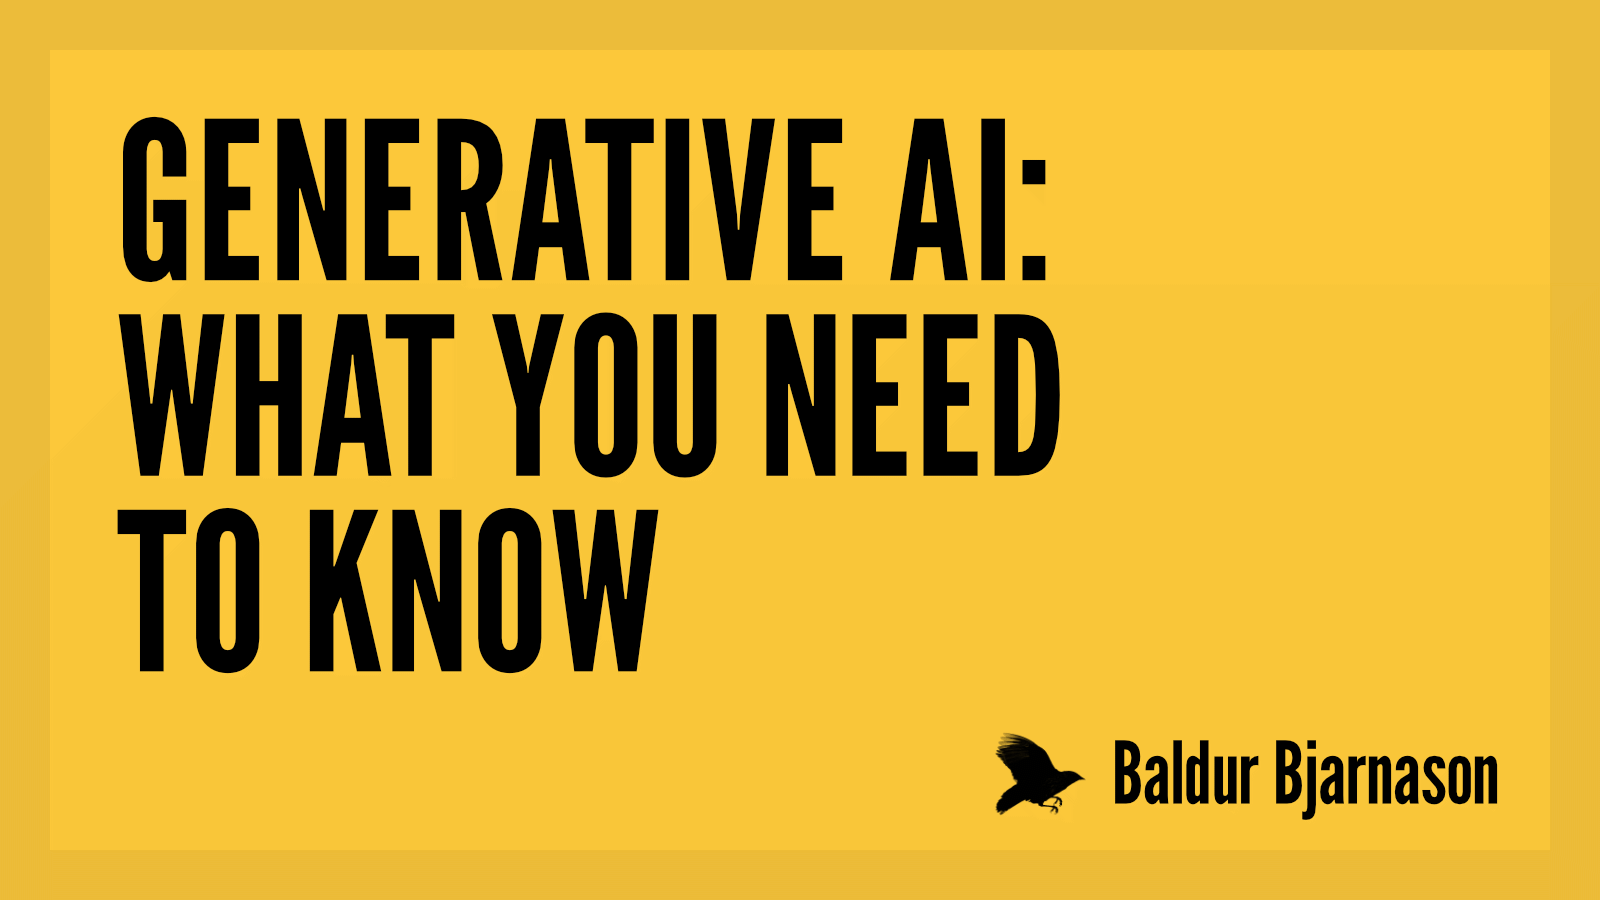 You can absolutely come to understand the basic workings of generative AI in terms of their capabilities and the risks they pose. The Generative AI: W